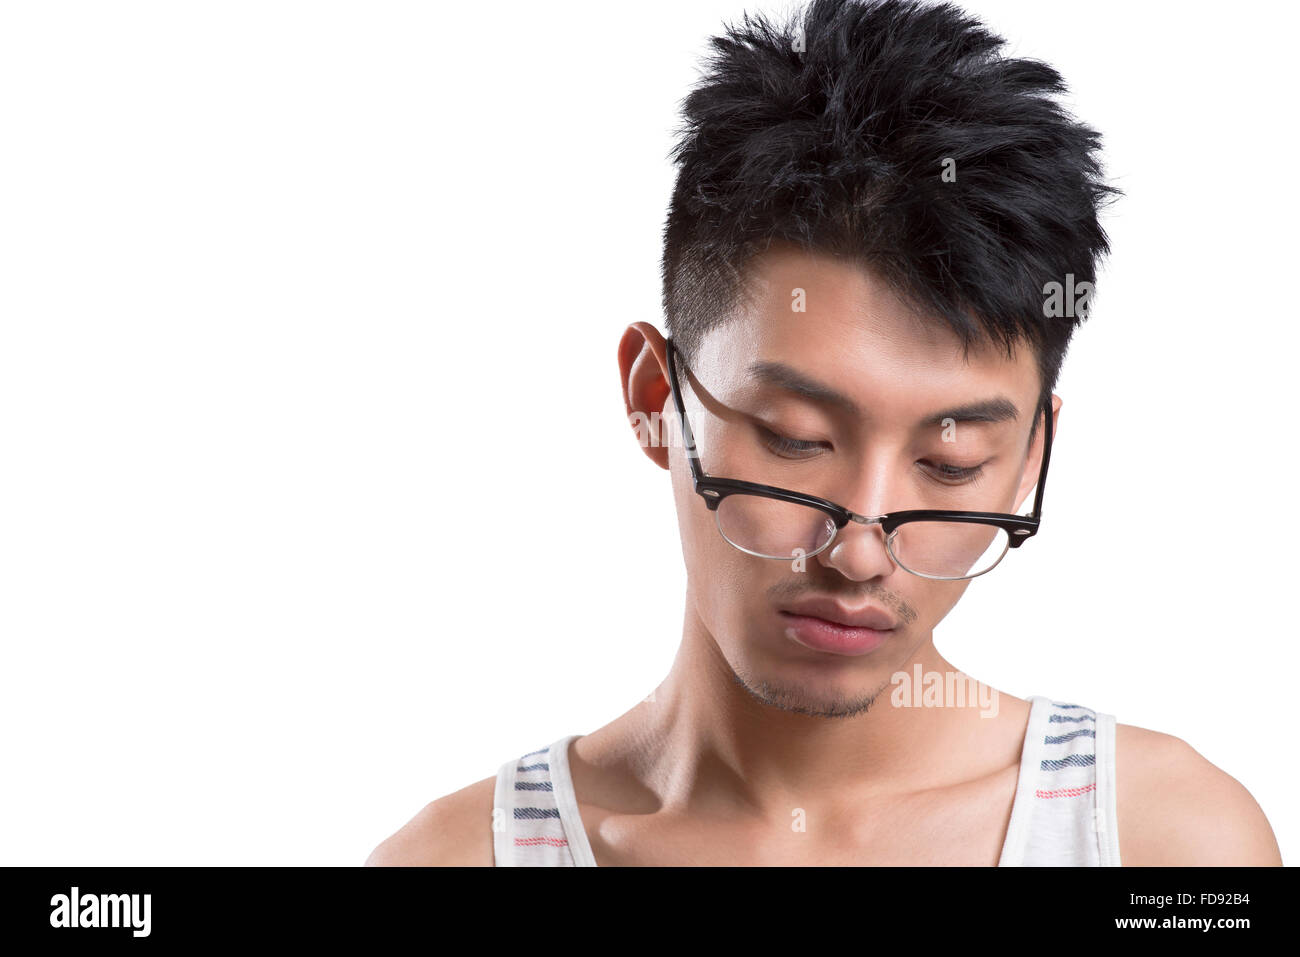 Portrait of young man depressed Stock Photo